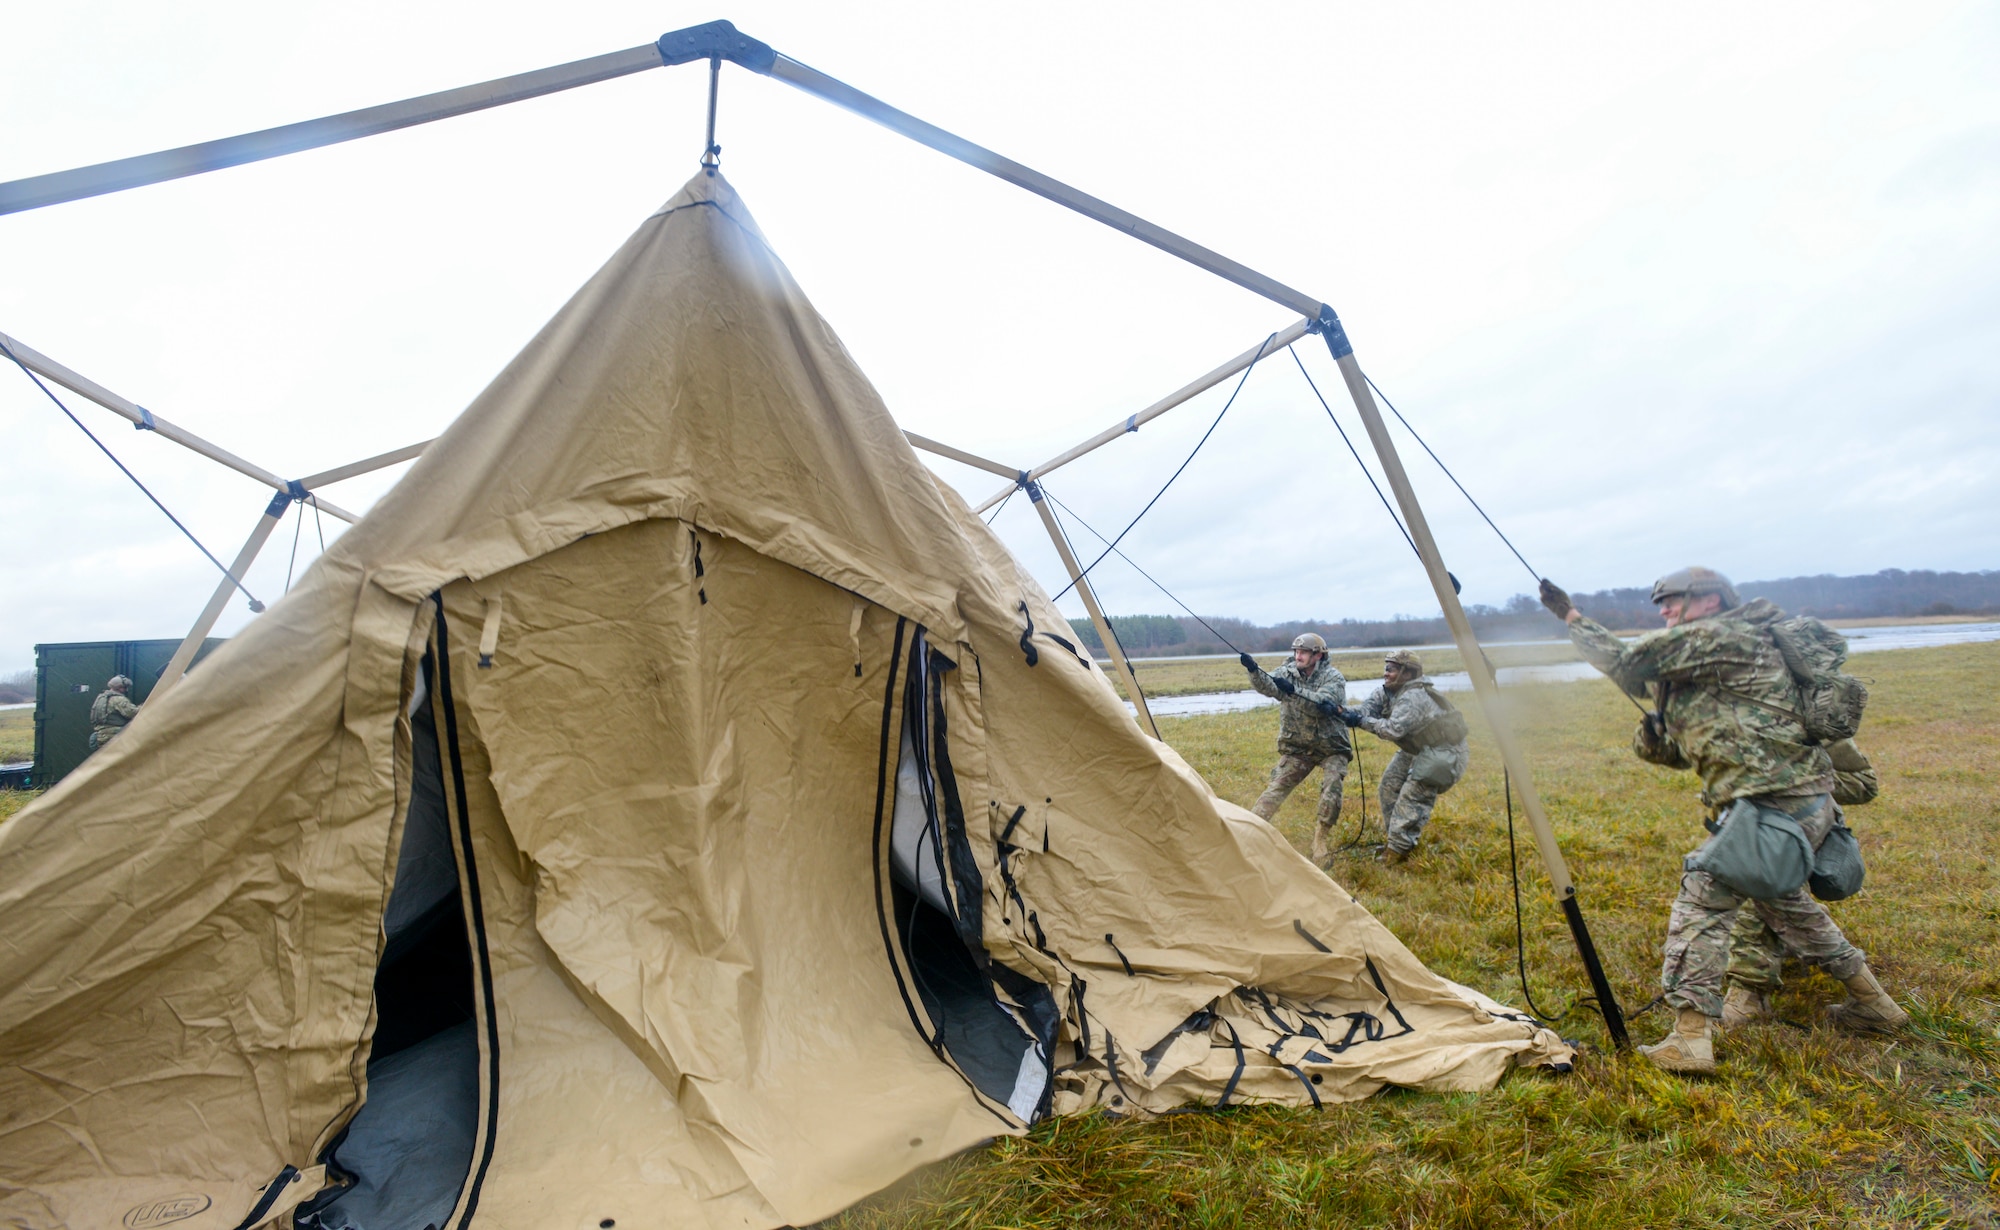 U.S. Airmen assigned to the 435th Contingency Response Group, 435th Air Ground Operations Wing, Ramstein Air Base, Germany, build a Tent Model 60 during exercise Contested Forge on Grostenquin Air Base, France, Dec. 3, 2018. Contested Forge is an annual exercise that tests the 435th CRG's ability to build a forward operating base and conduct airfield operations in an austere environment, friendly or hostile. (U.S. Air Force photo by Staff Sgt. Timothy Moore)